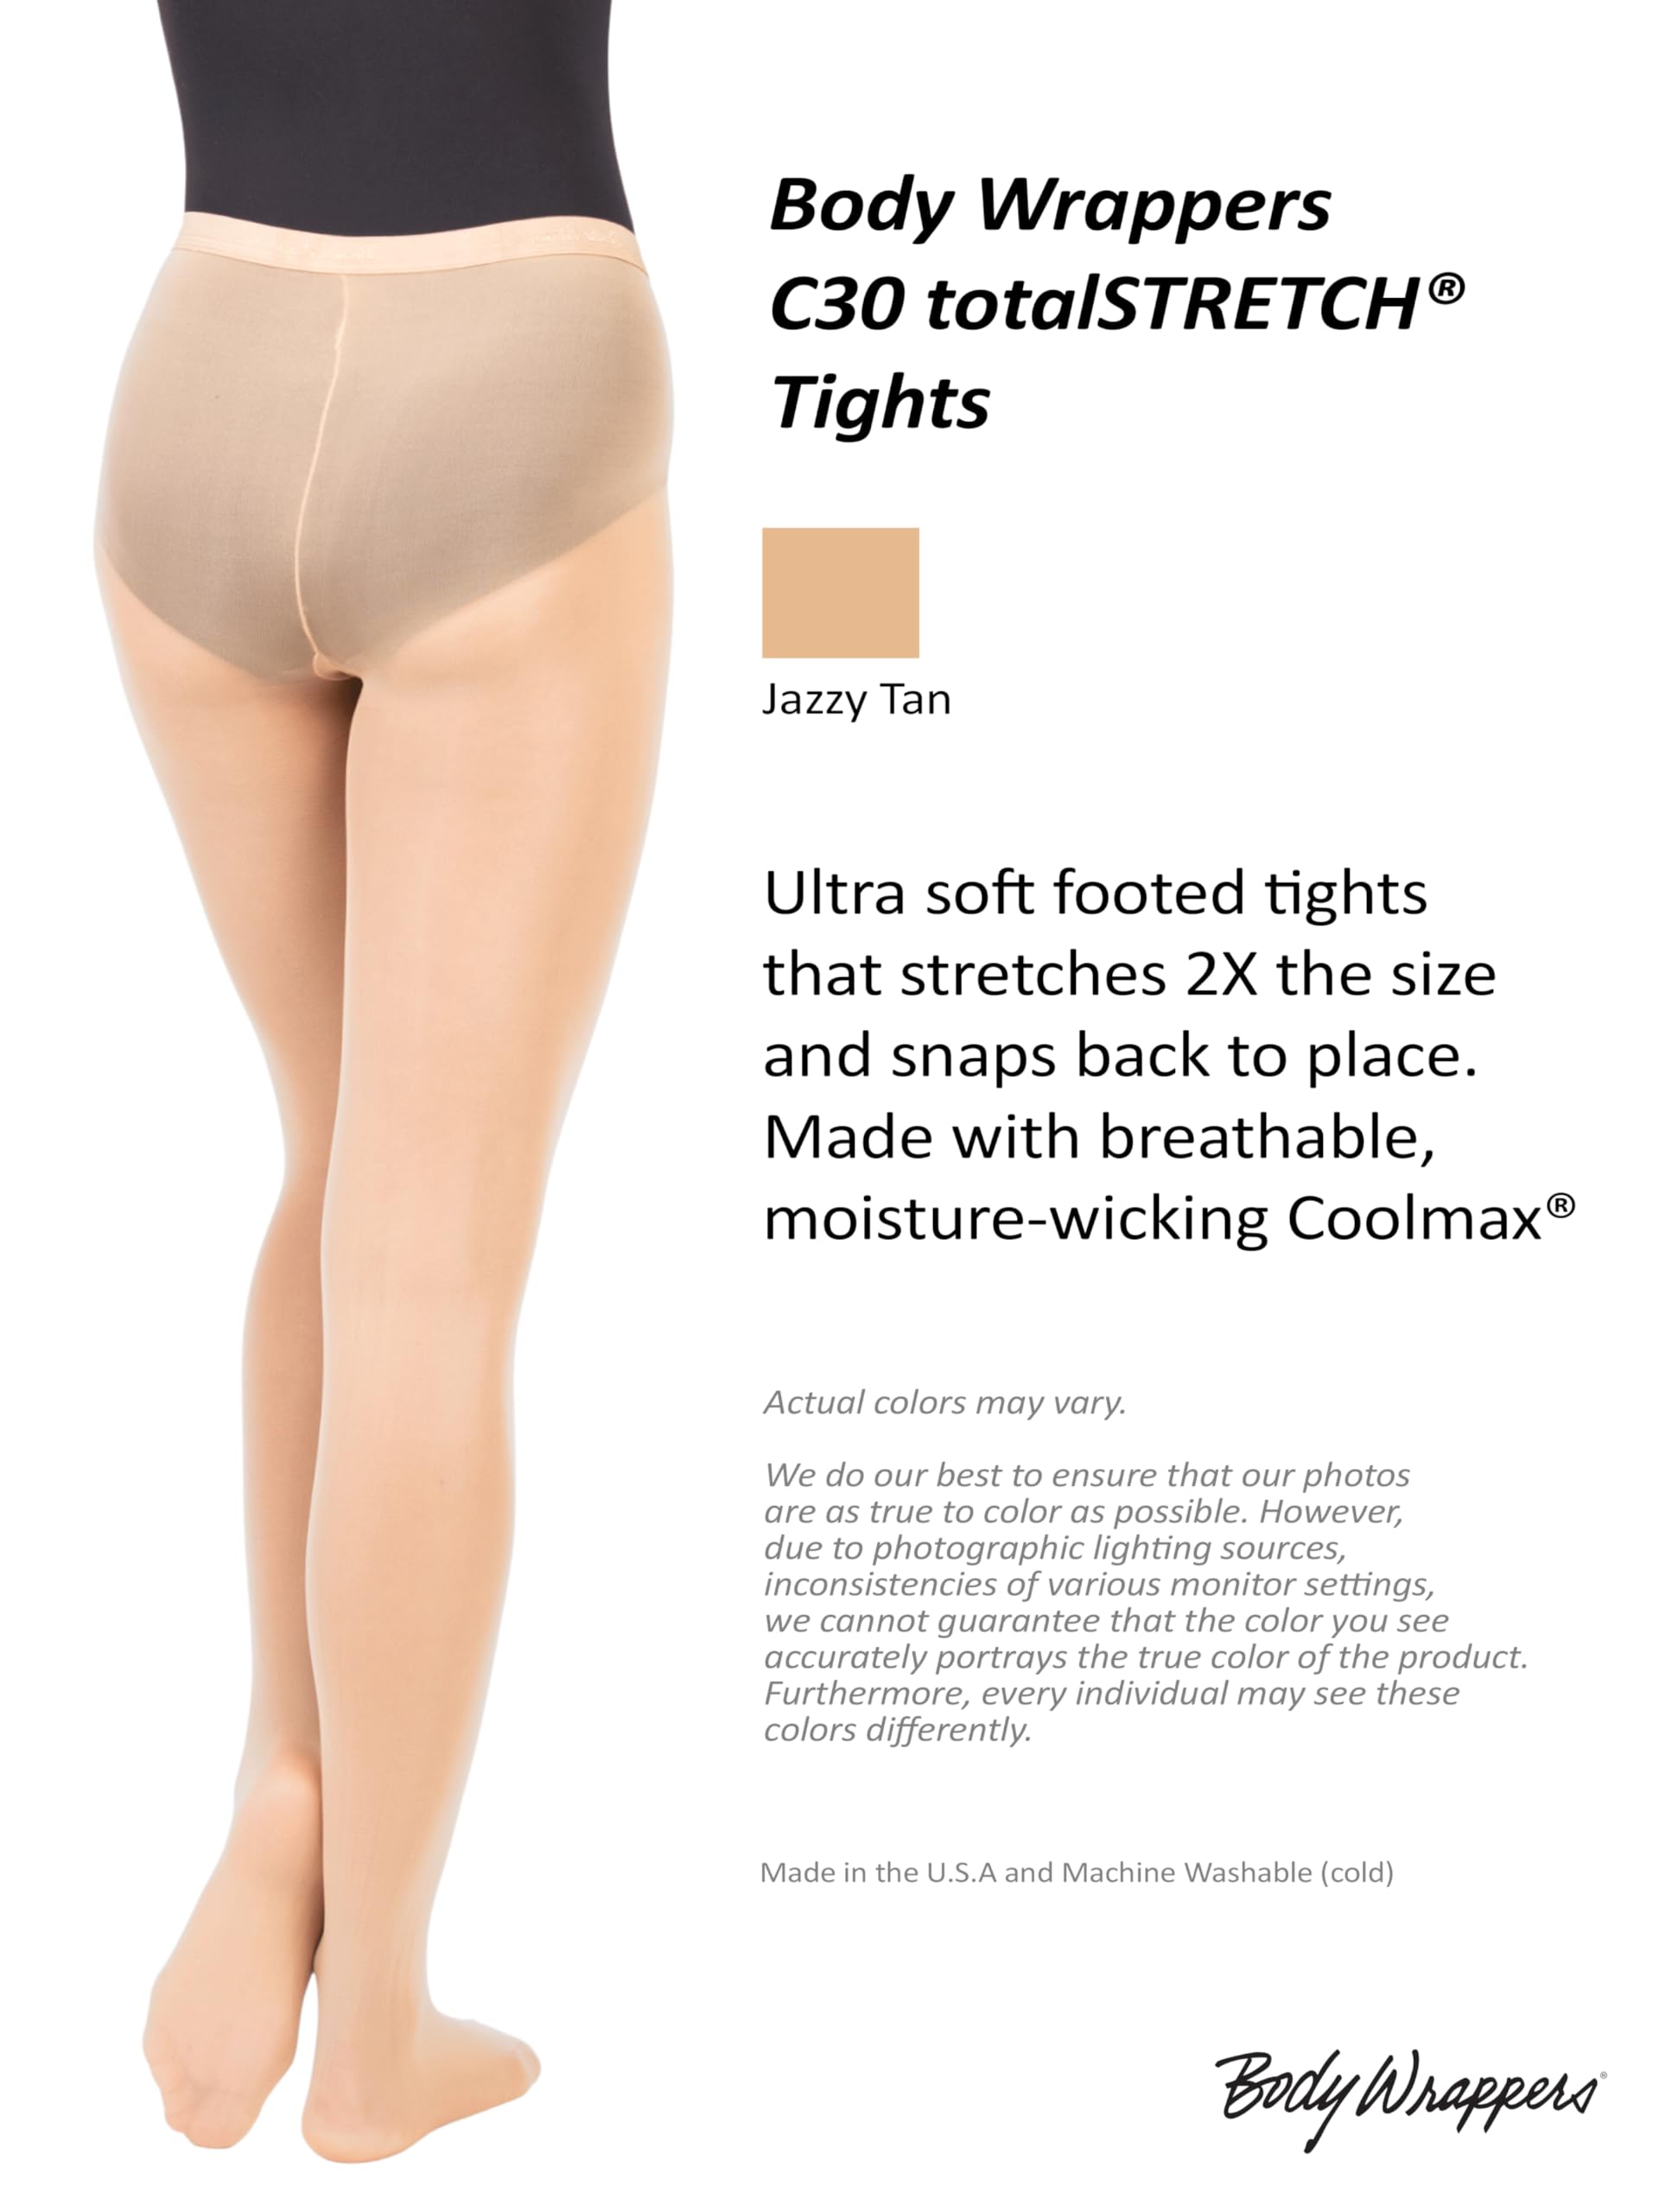 Body Wrappers C30 Girls Total Stretch Footed Tights